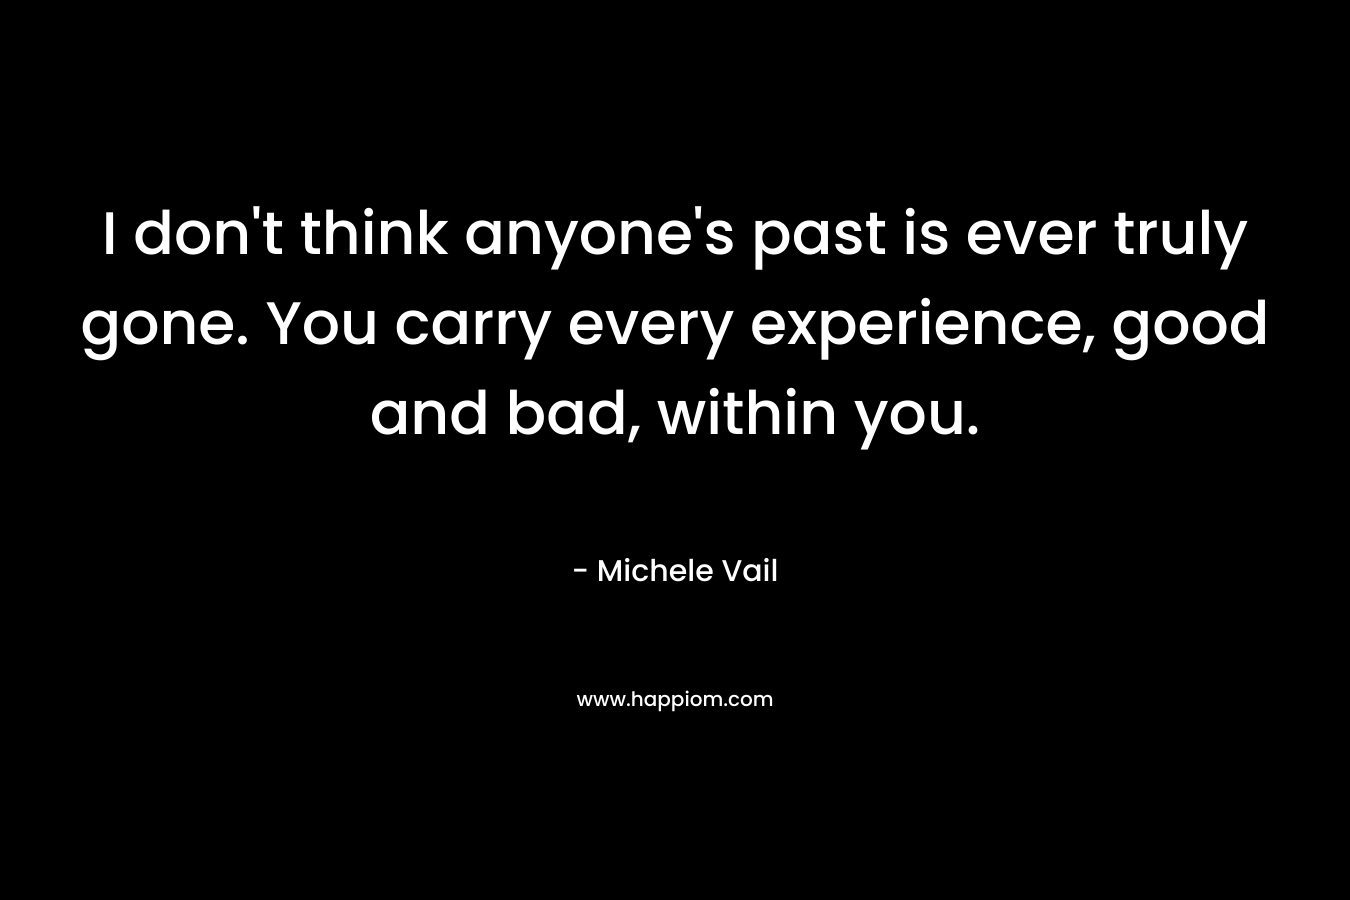 I don't think anyone's past is ever truly gone. You carry every experience, good and bad, within you.